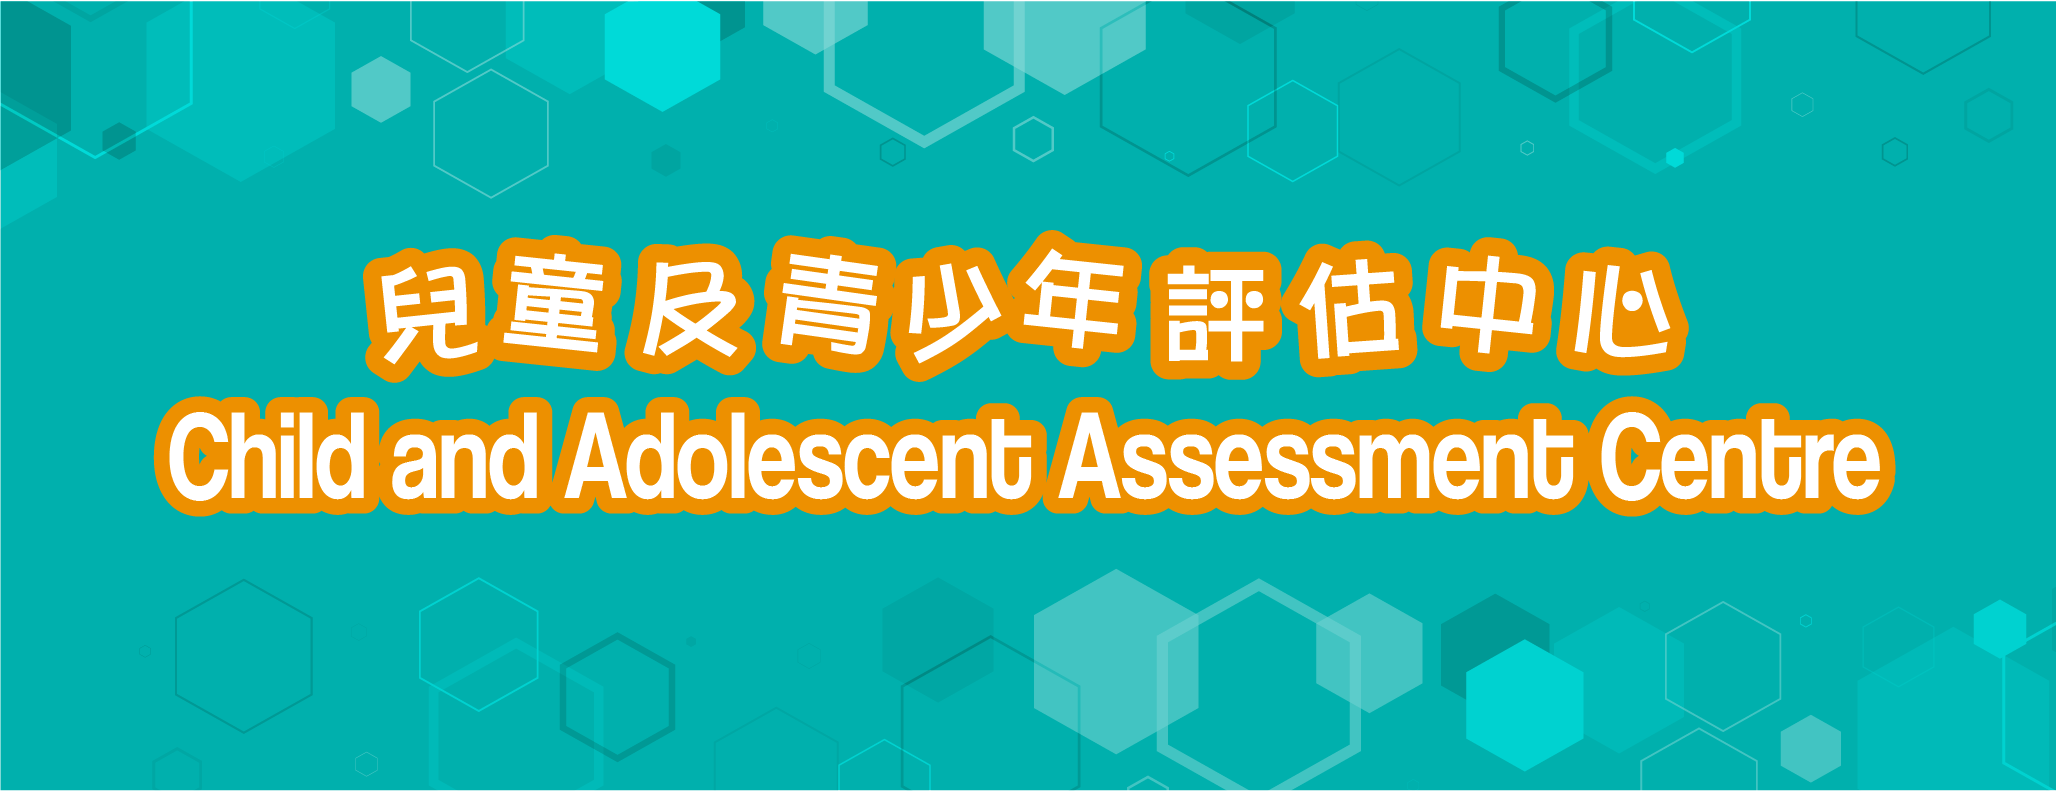 Child and Adolescent Assessment Center